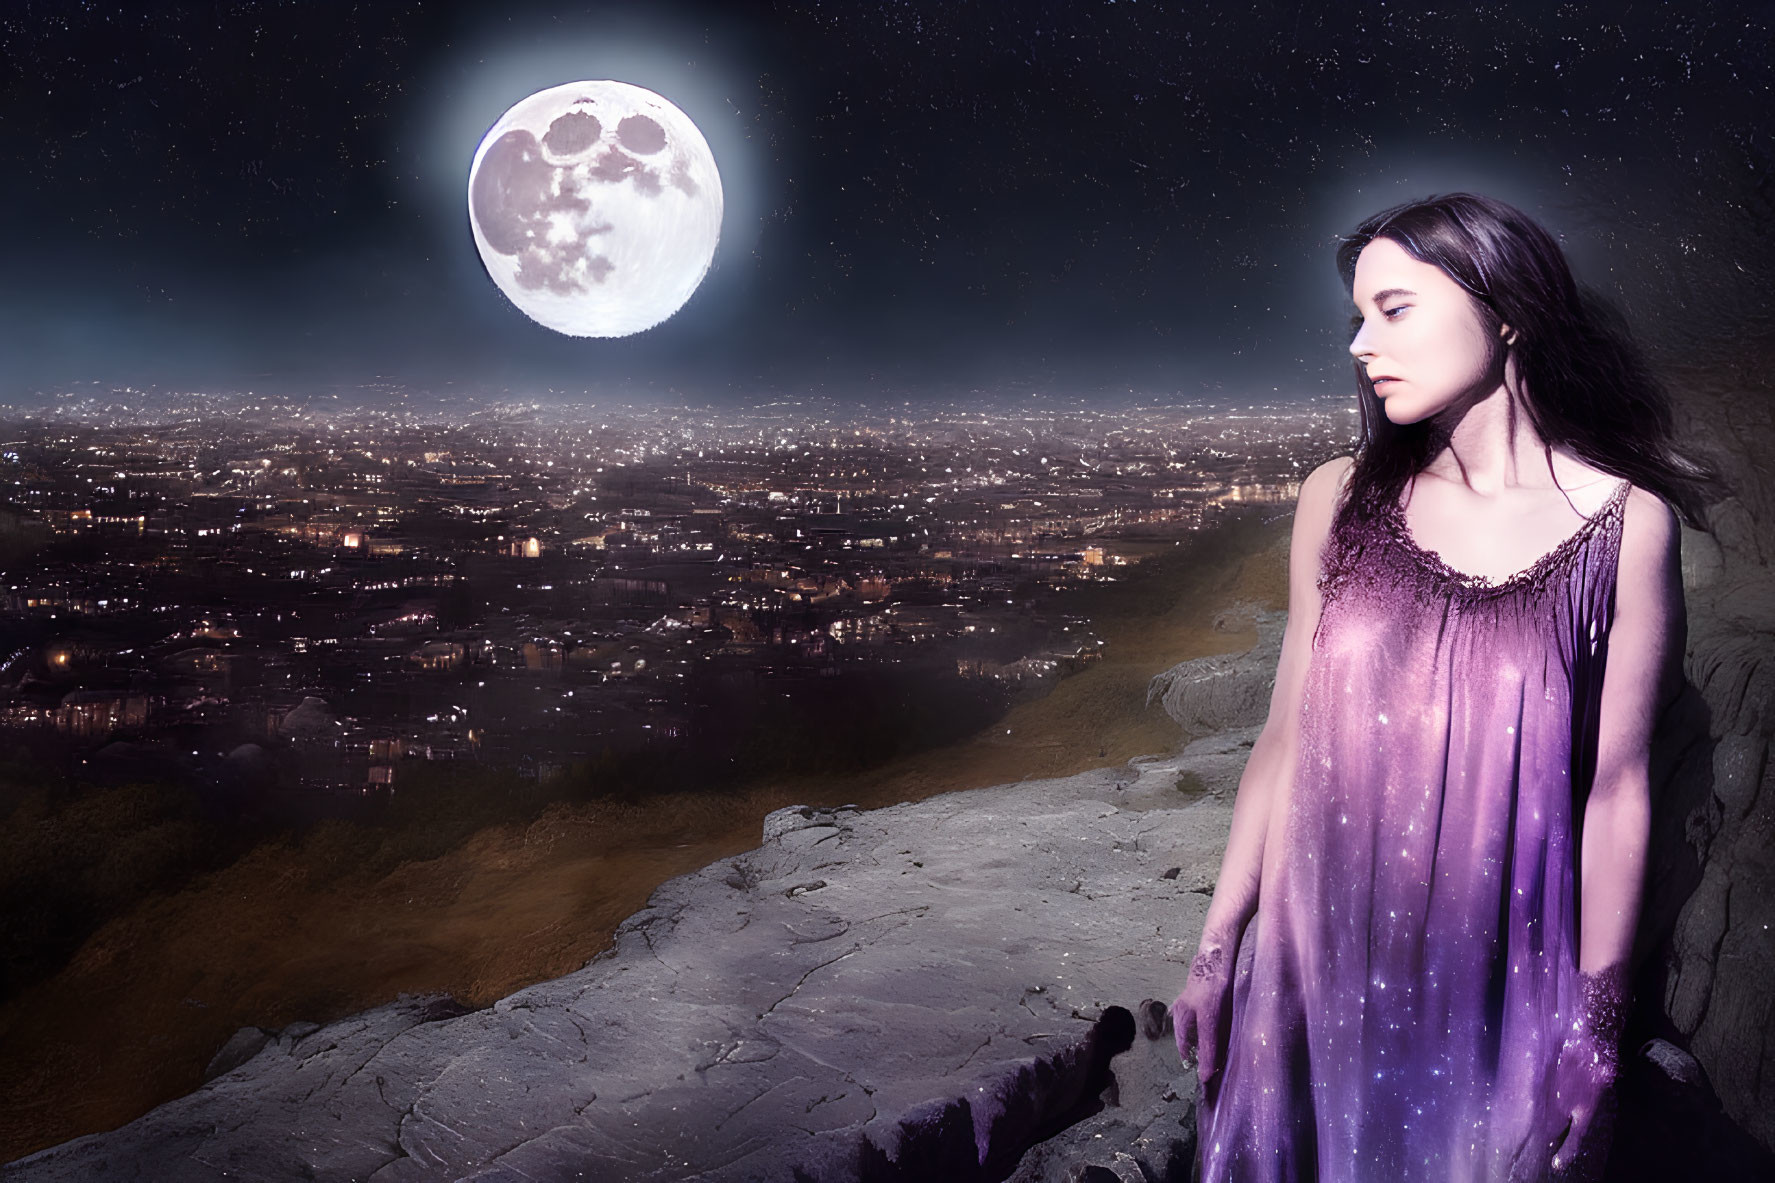 Woman in purple dress on cliff gazes at city under full moon